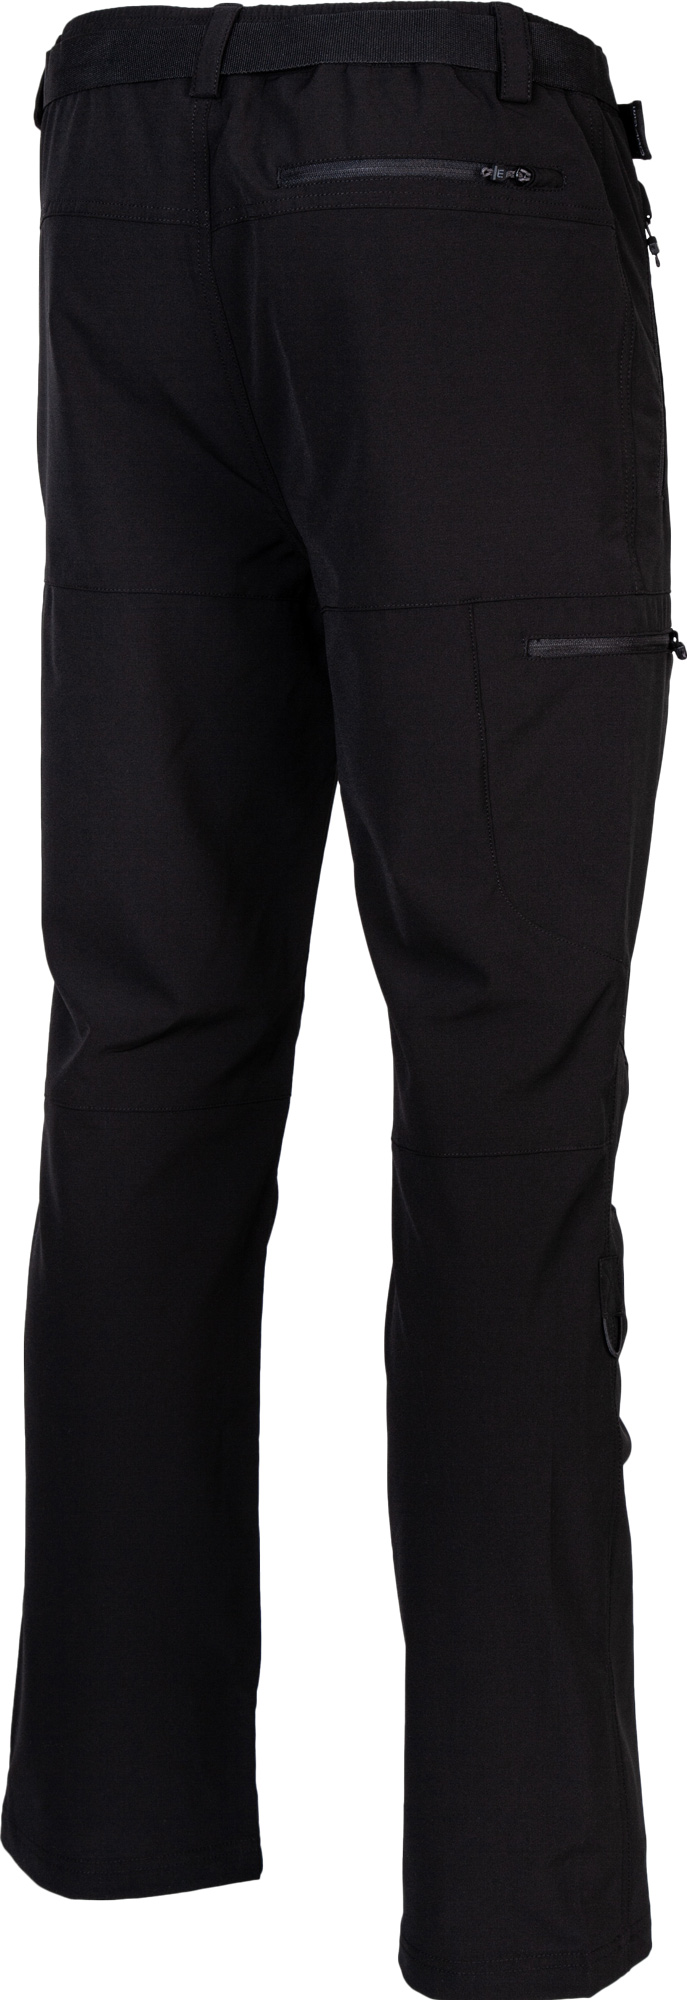 Highly breathable softshell pants